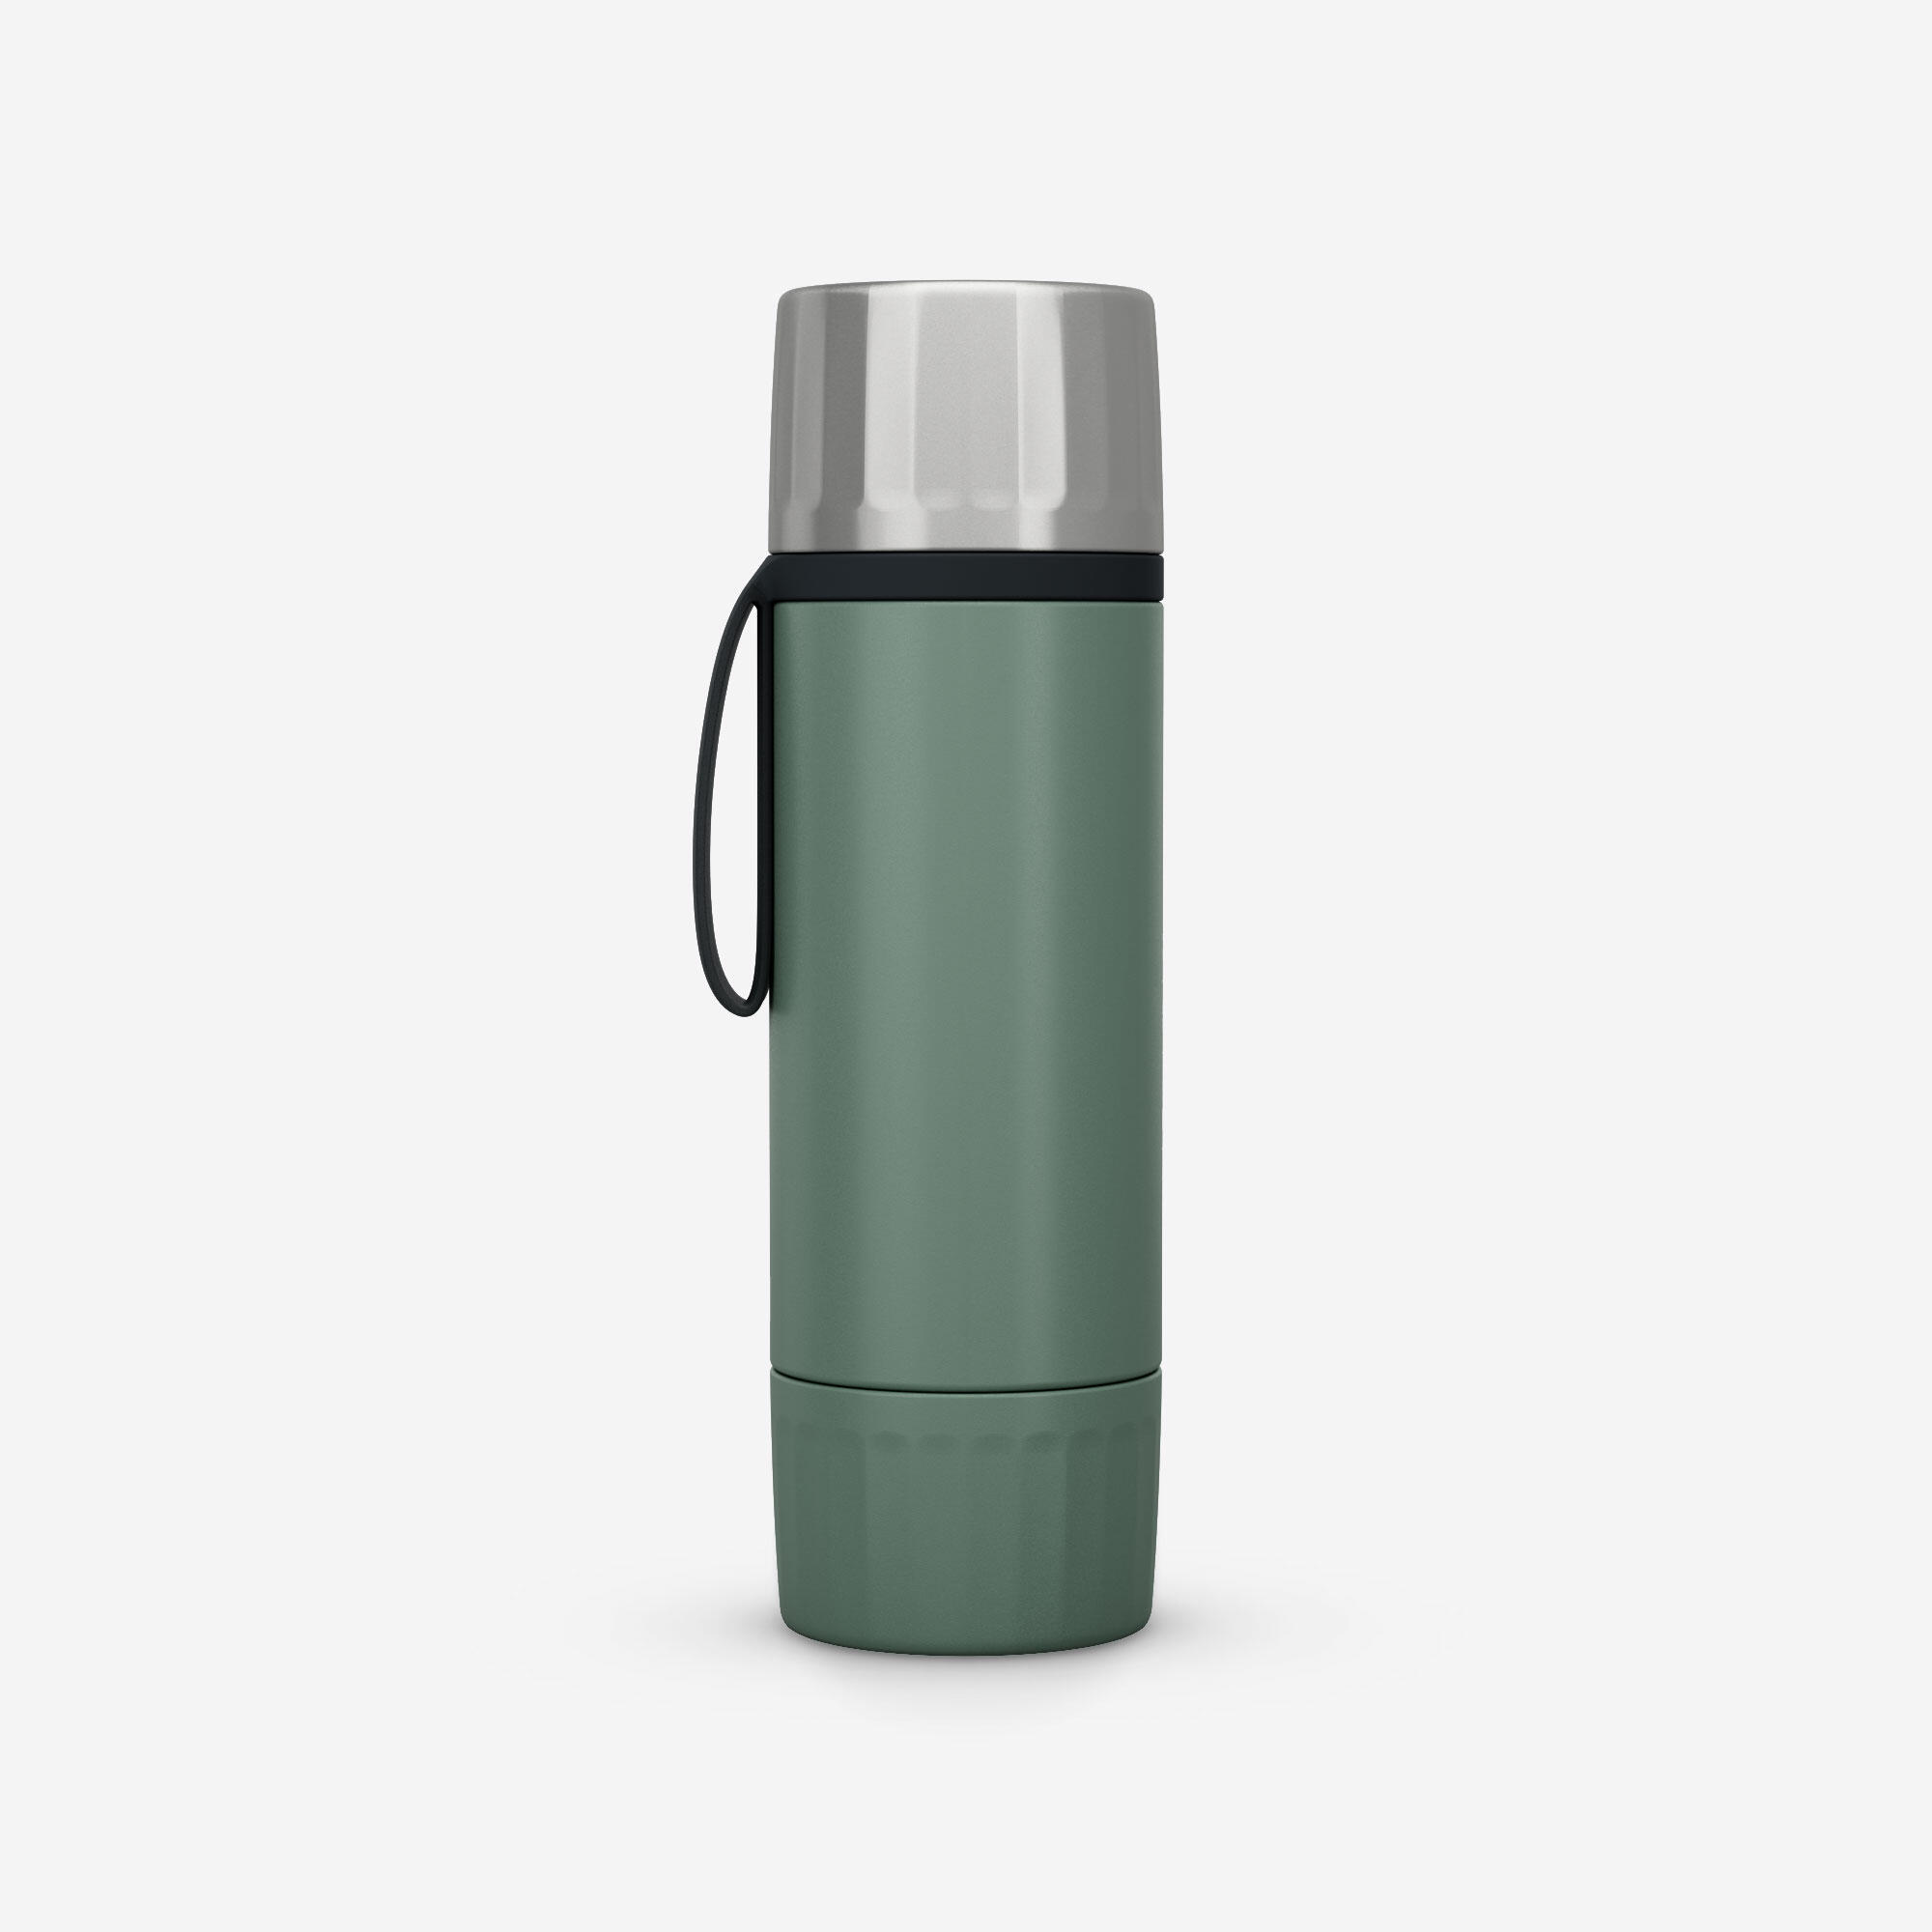 Hiking MH900 1l isothermal stainless steel flask, quick opening cap 2/12